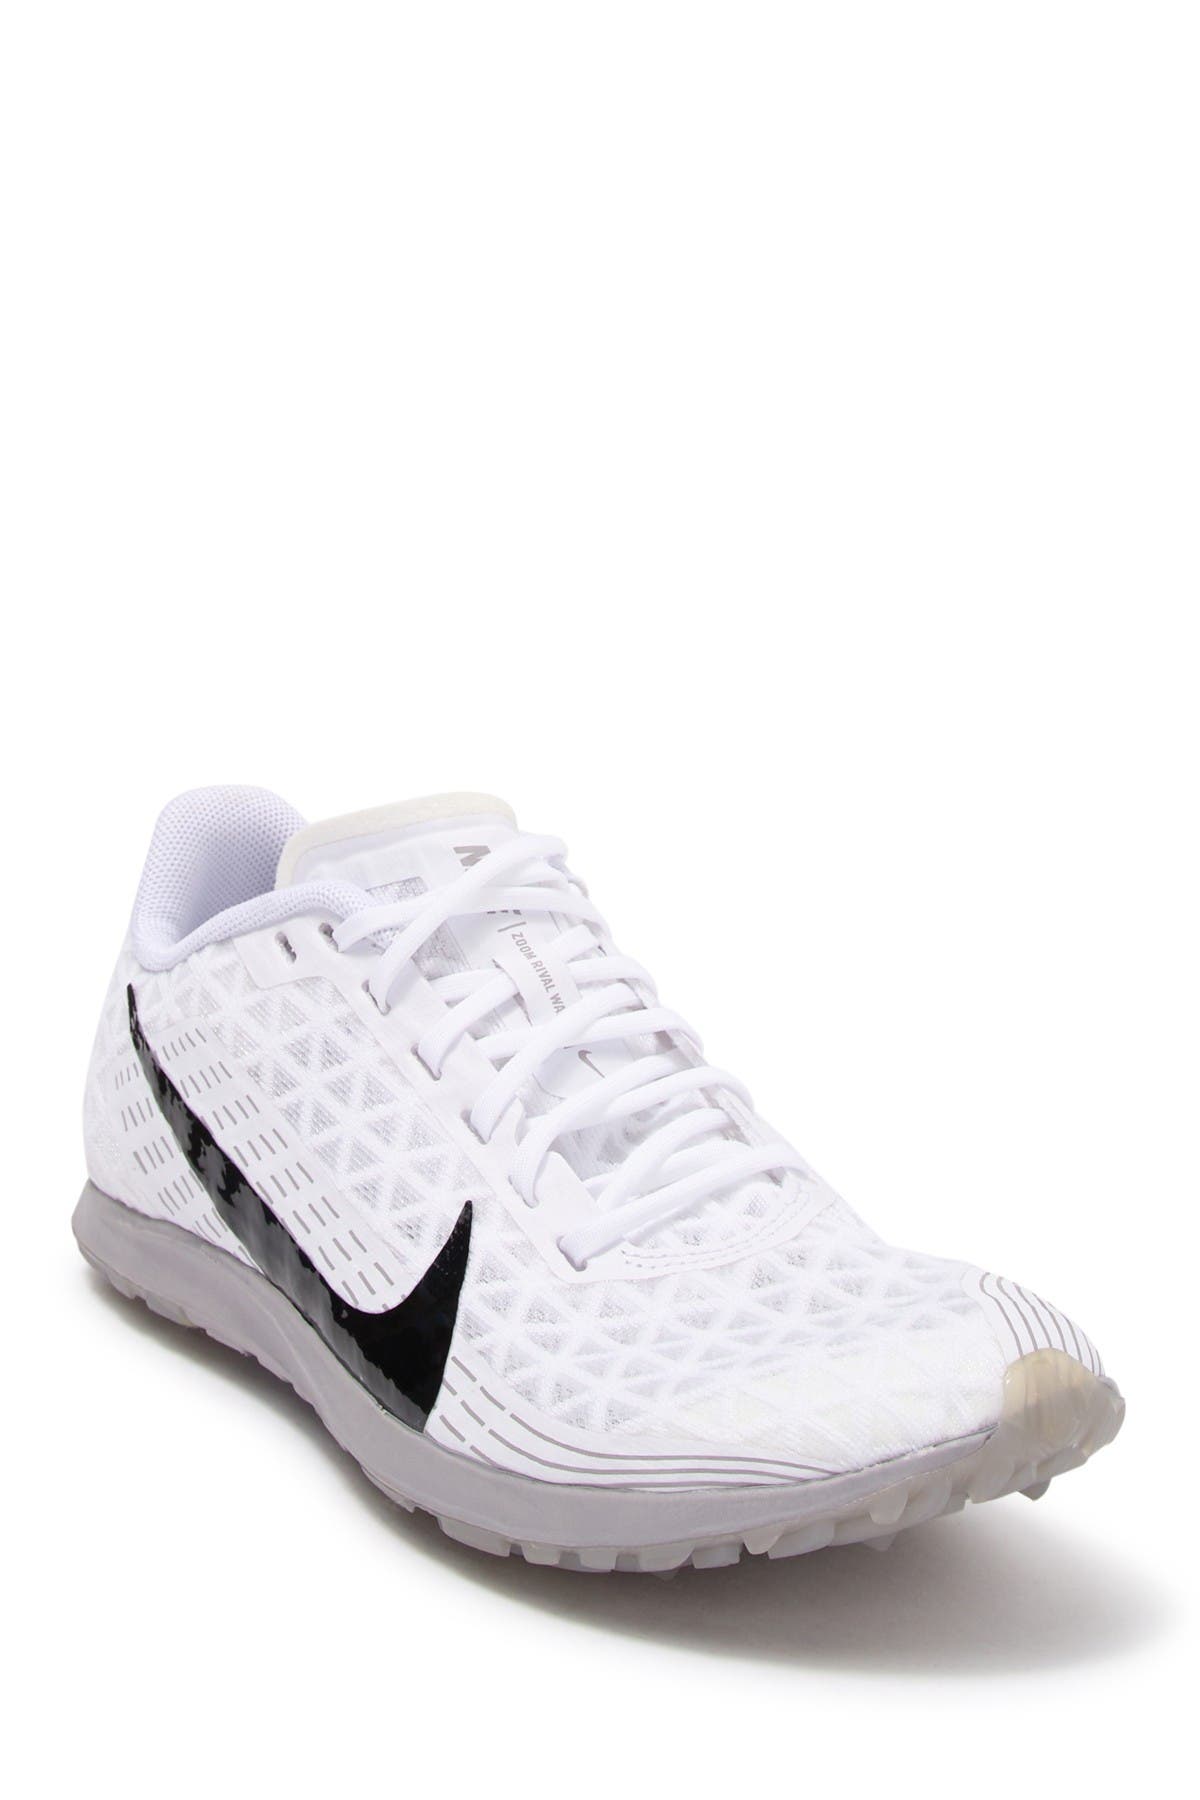 nike zoom rival waffle weight